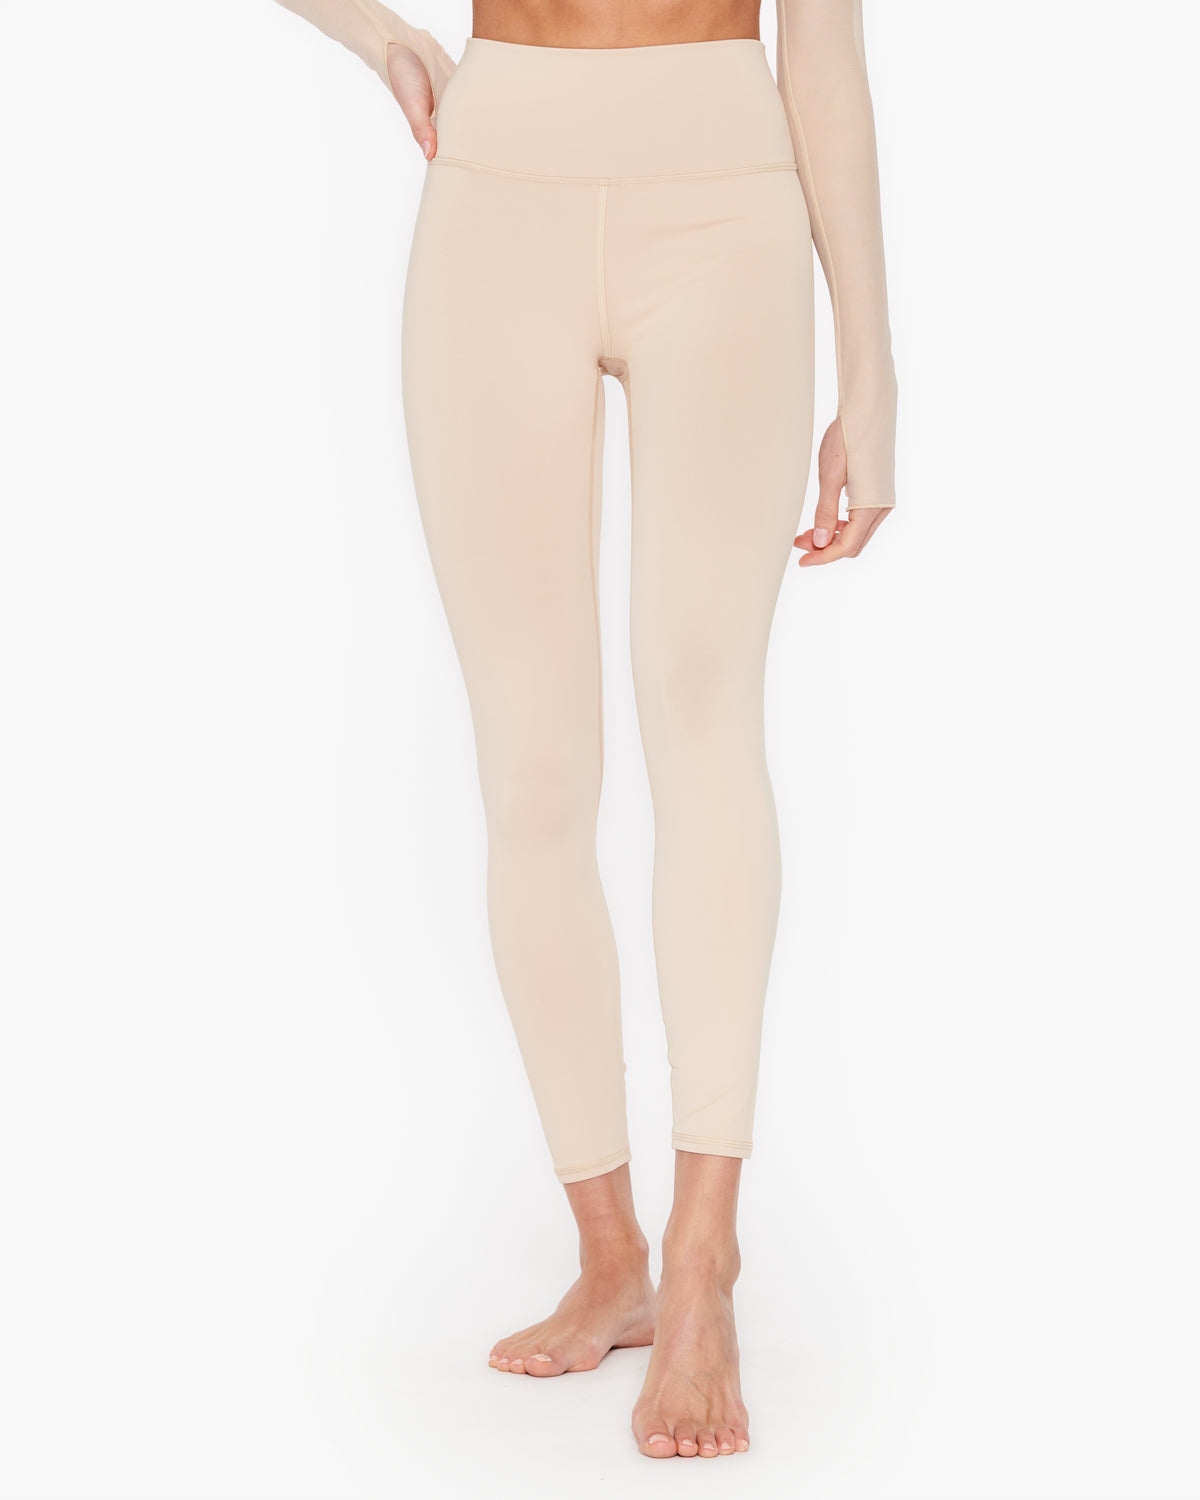 NWT💖ALO 7/8 High-Waist Airlift Leggings Size L